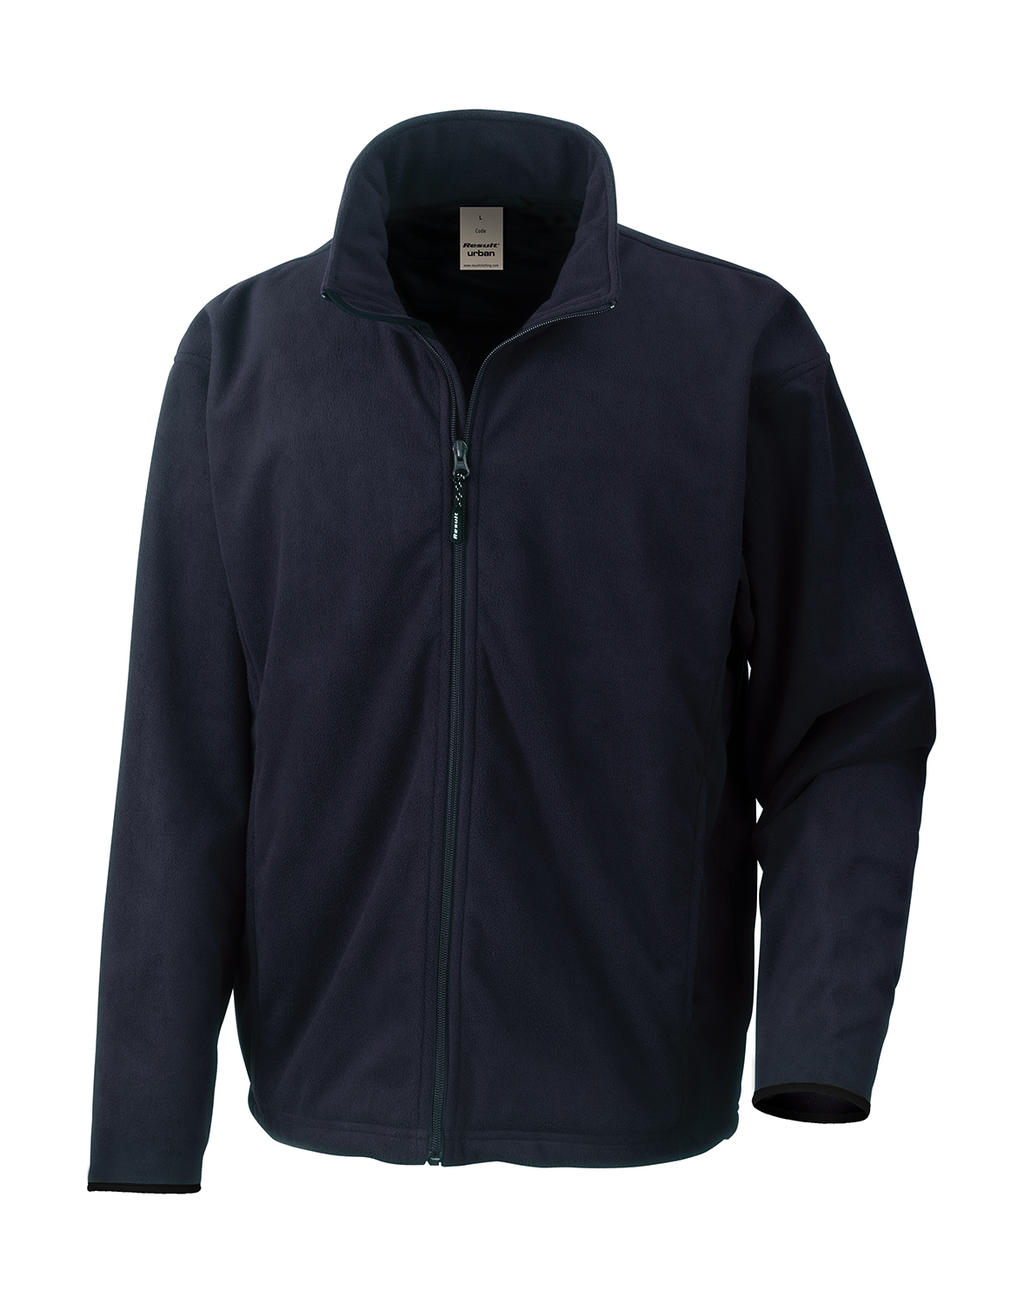  Climate Stopper Water Resistant Fleece in Farbe Navy